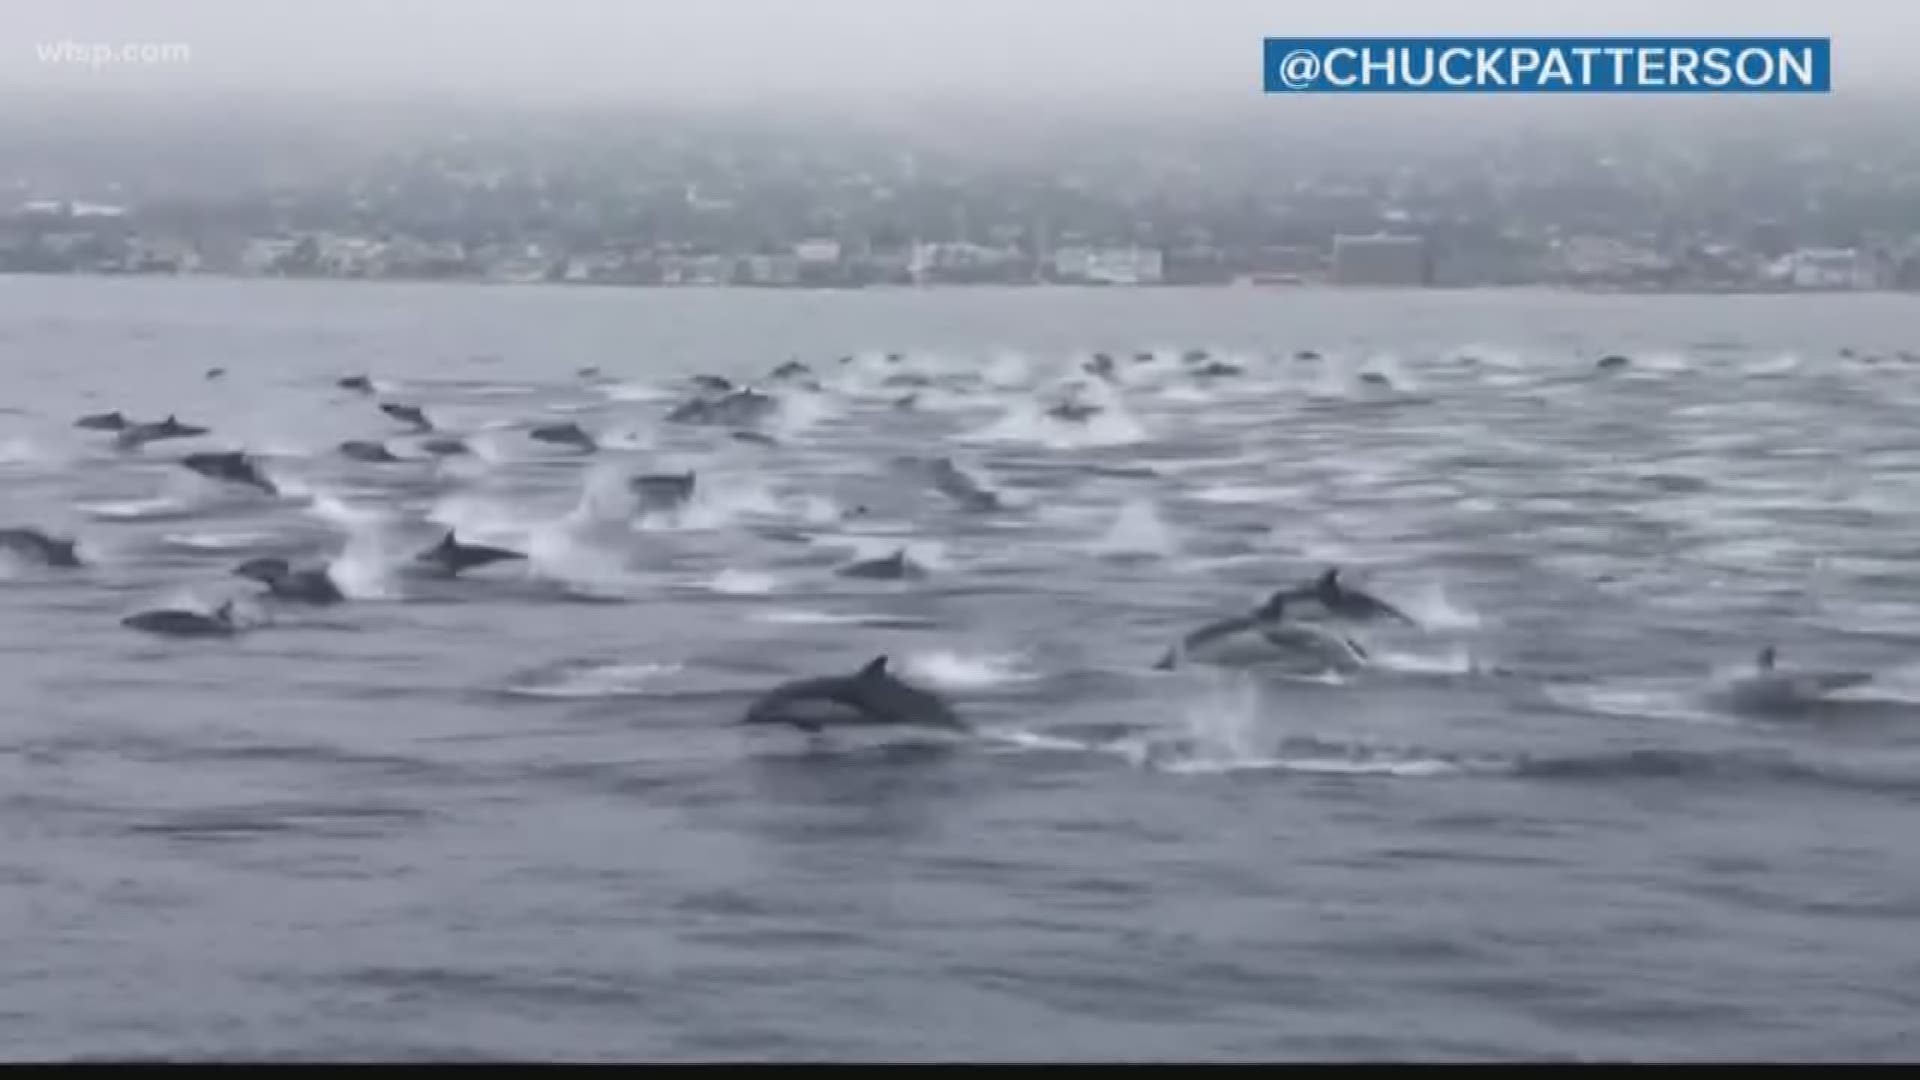 More than 100 dolphins frolic in amazing video. Also, a Florida trapper catches the elusive Chance the Snapper.